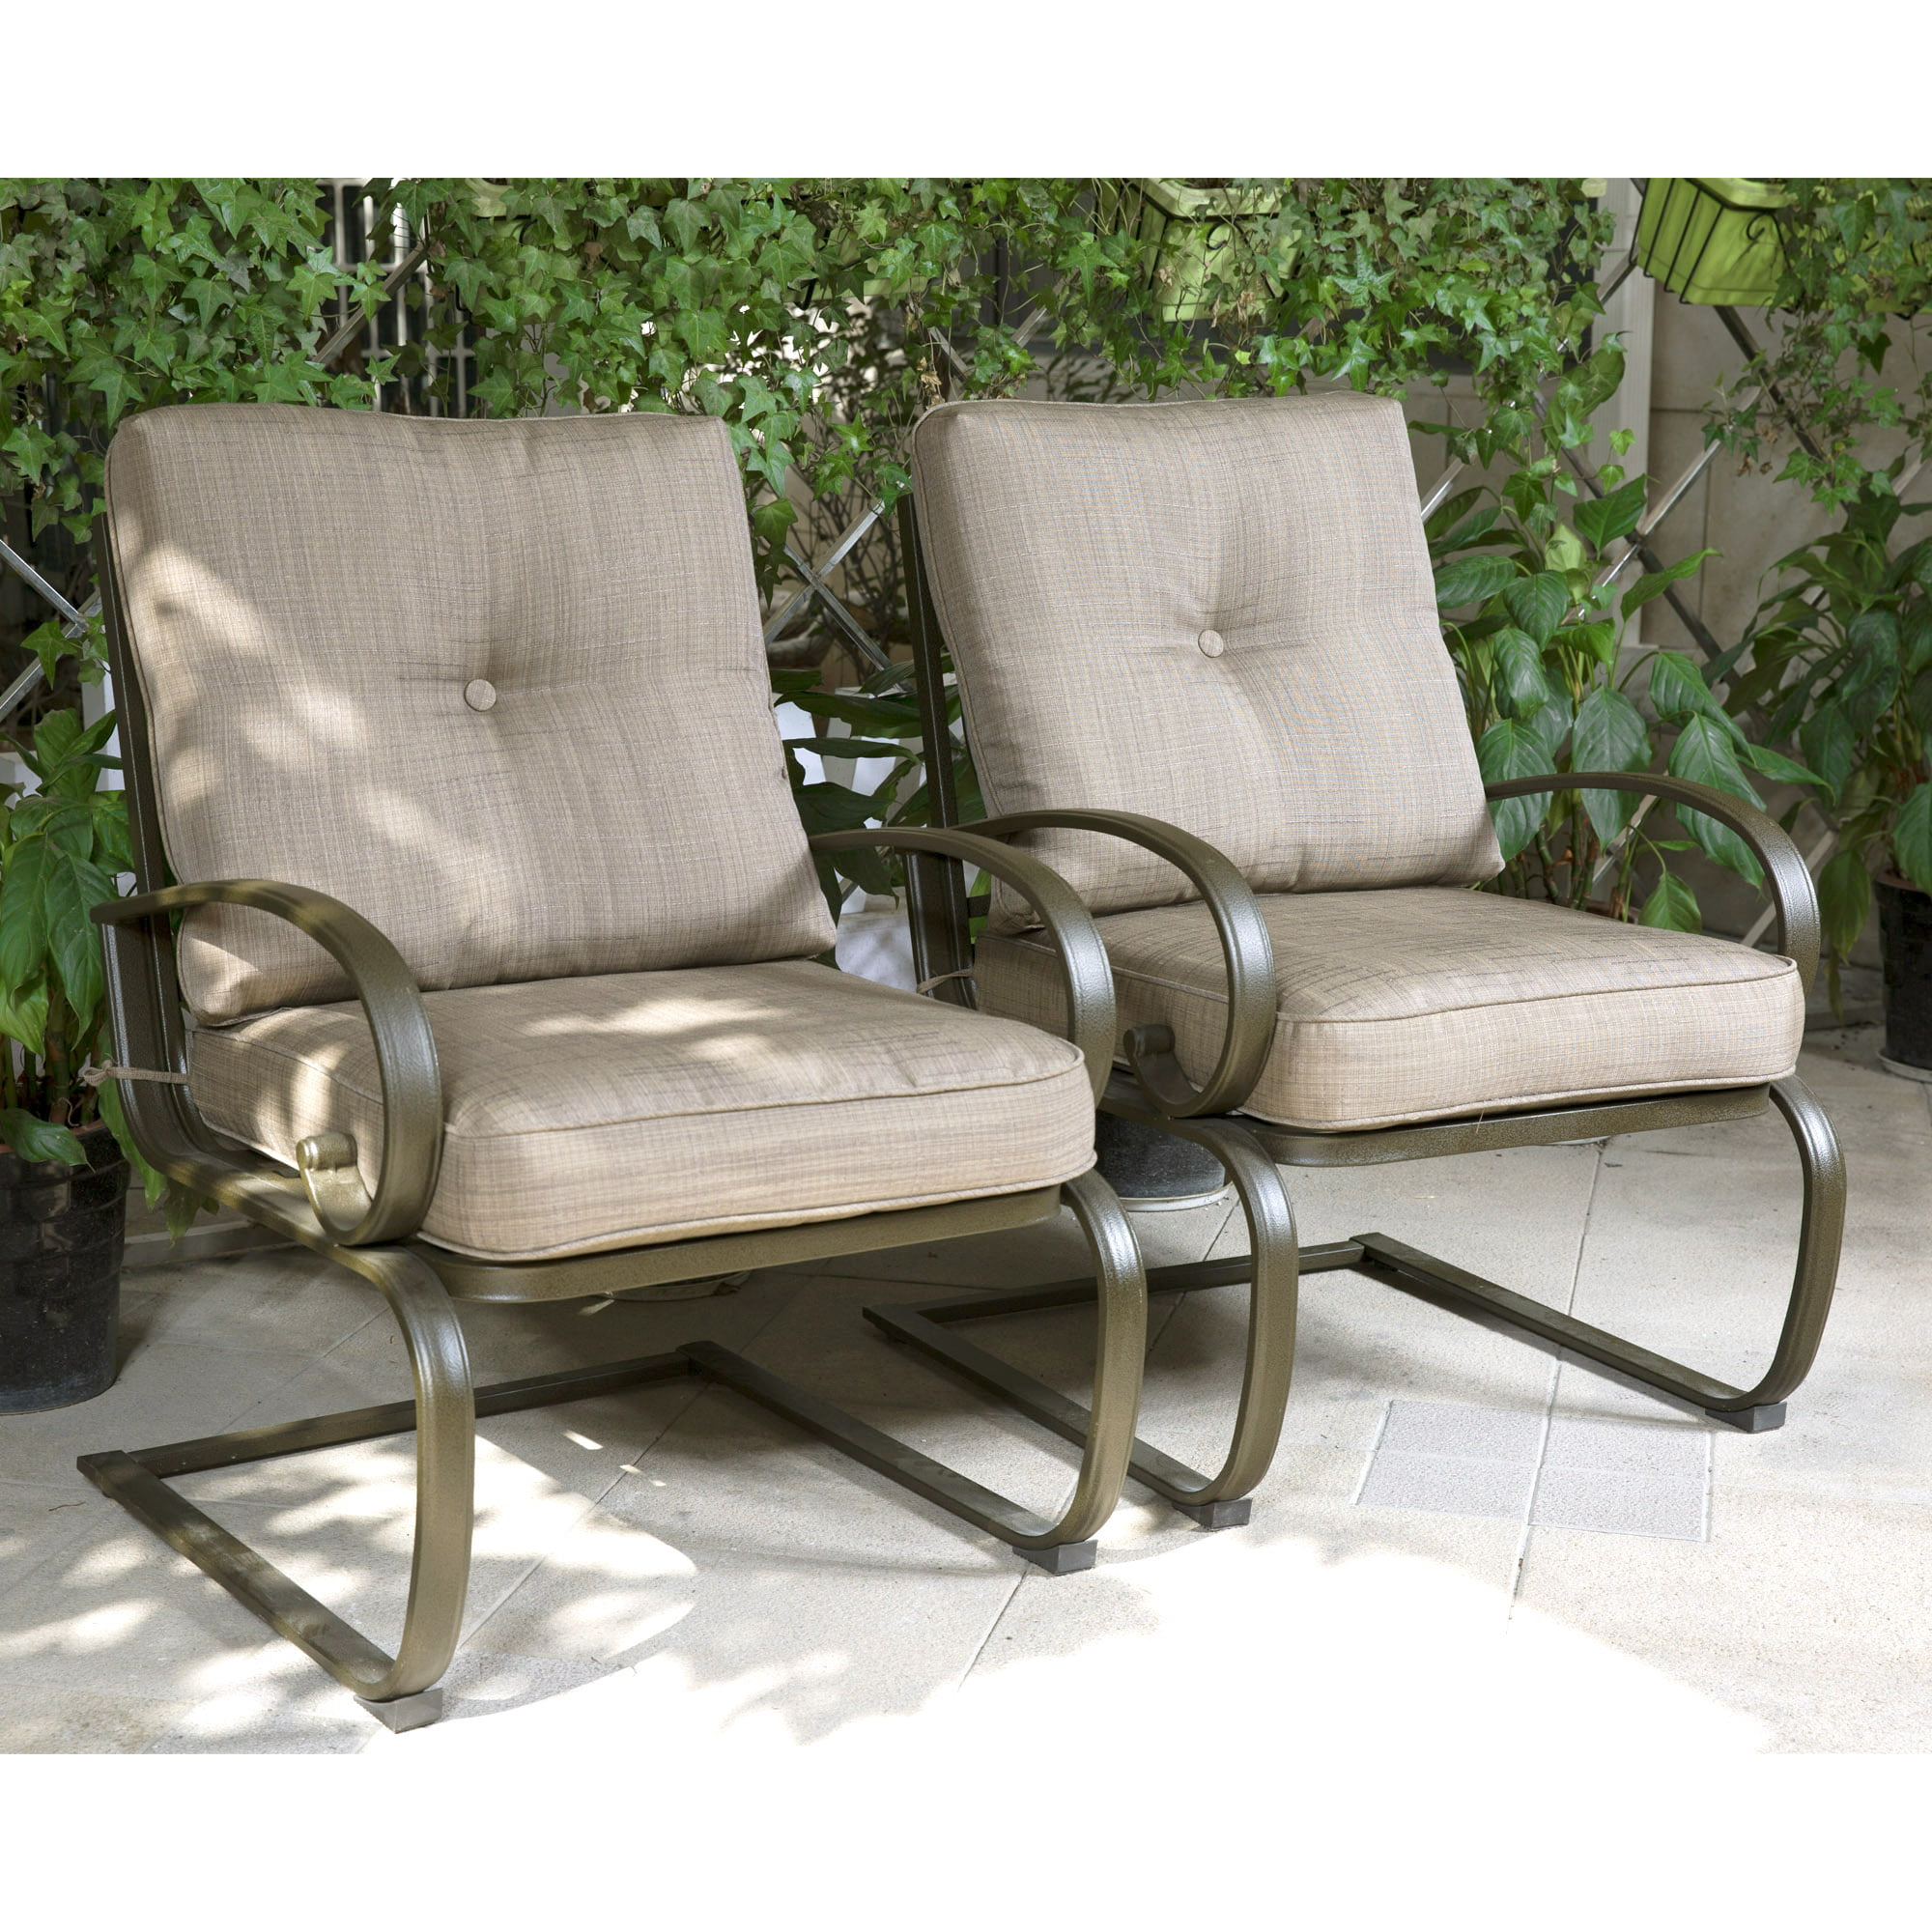 Finefind Set Of 2 Club Chairs Outdoor, Iron Chairs Outdoor